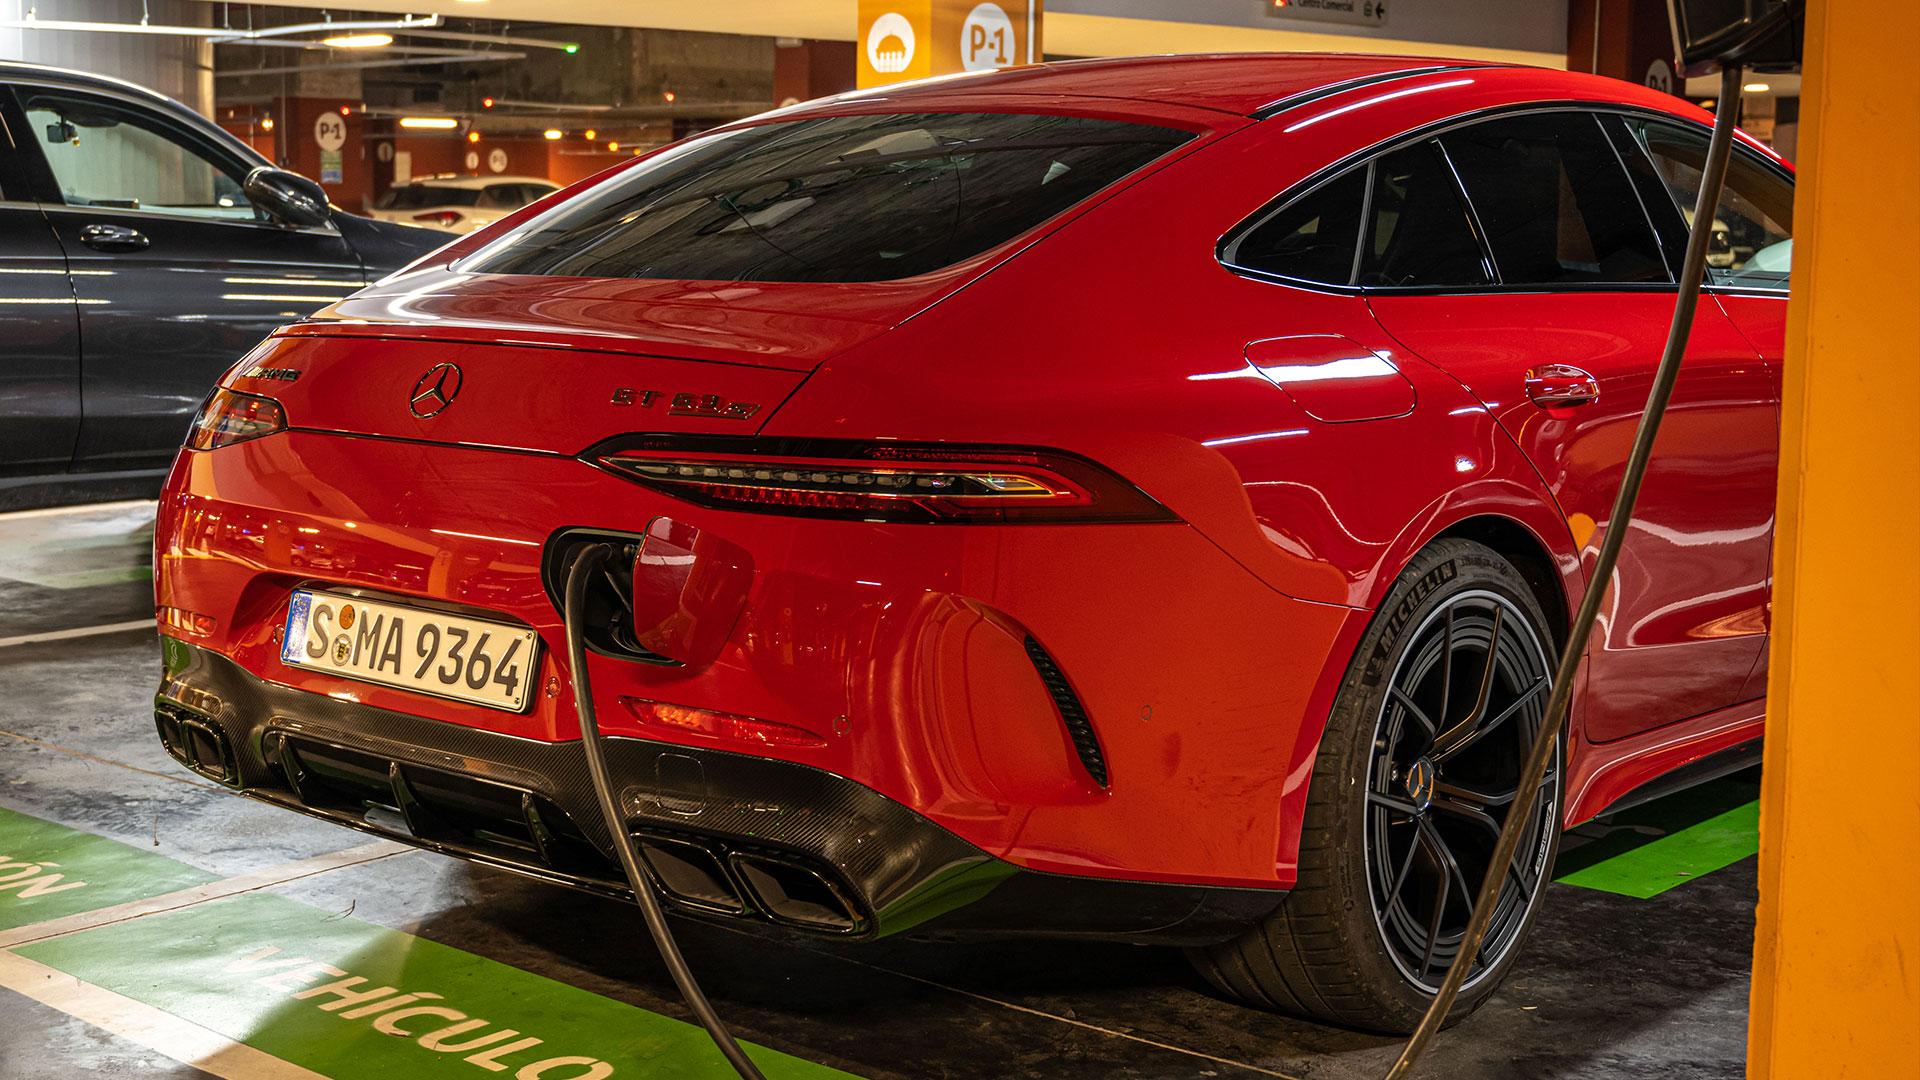 The Mercedes-AMG GT 63 SE Performance is shipped diagonally at the rear